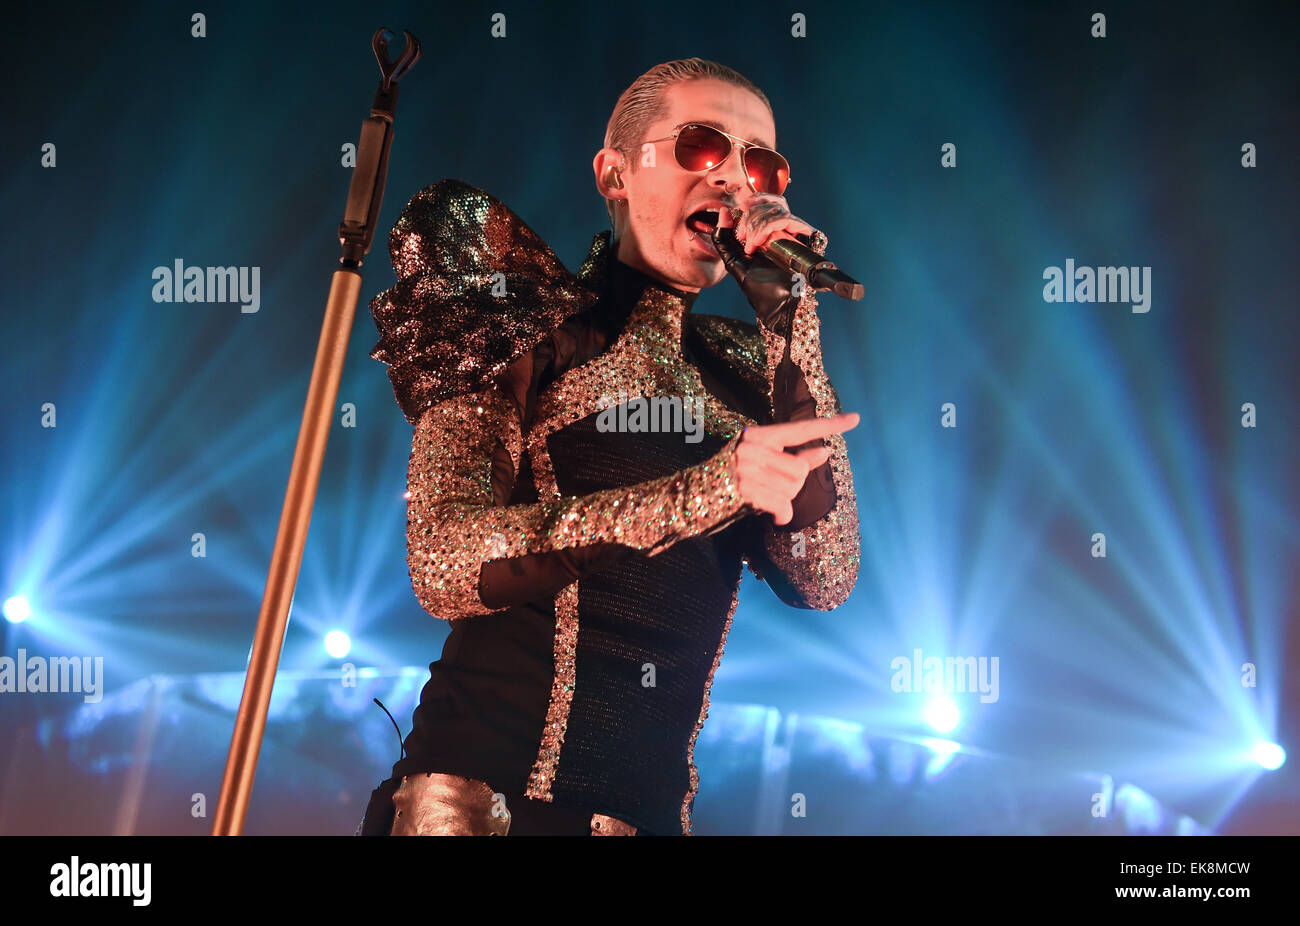 Singer Bill Kaulitz of the band Tokio Hotel performs on stage during their 'Feel it All - World Tour 2015' in Berlin, Germany, 23 March 2015. Photo: Britta Pedersen/dpa Stock Photo